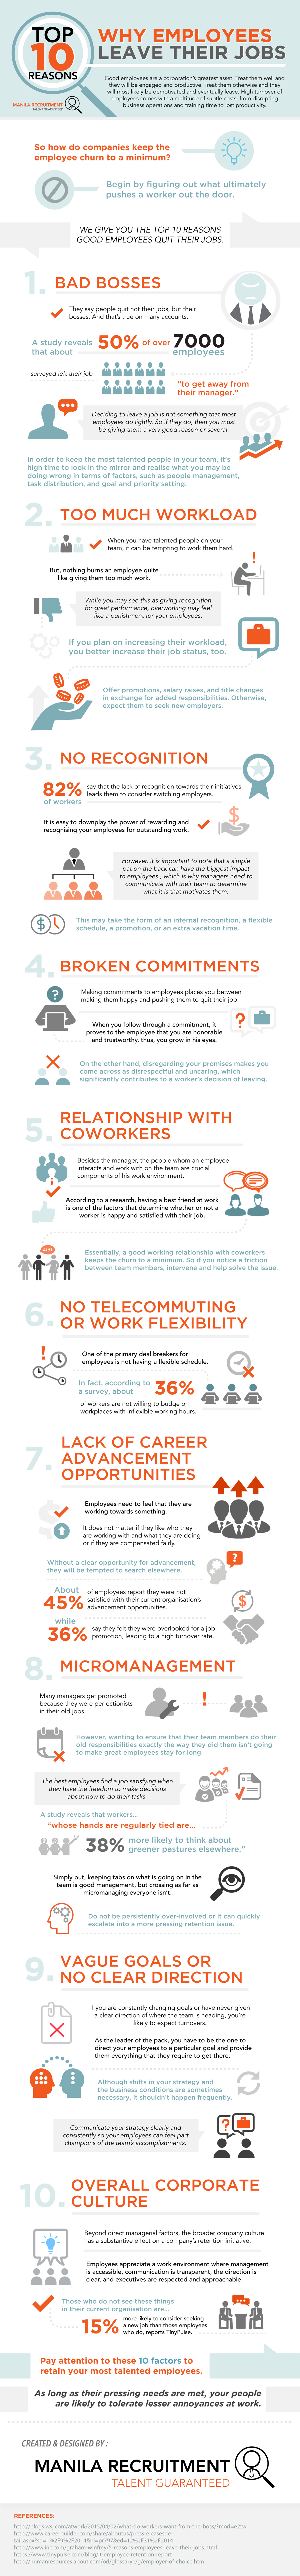 20160218th0743-Top-10-Reasons-Why-Employees-Leave-Their-Job-infographic-by-manila-recruitment